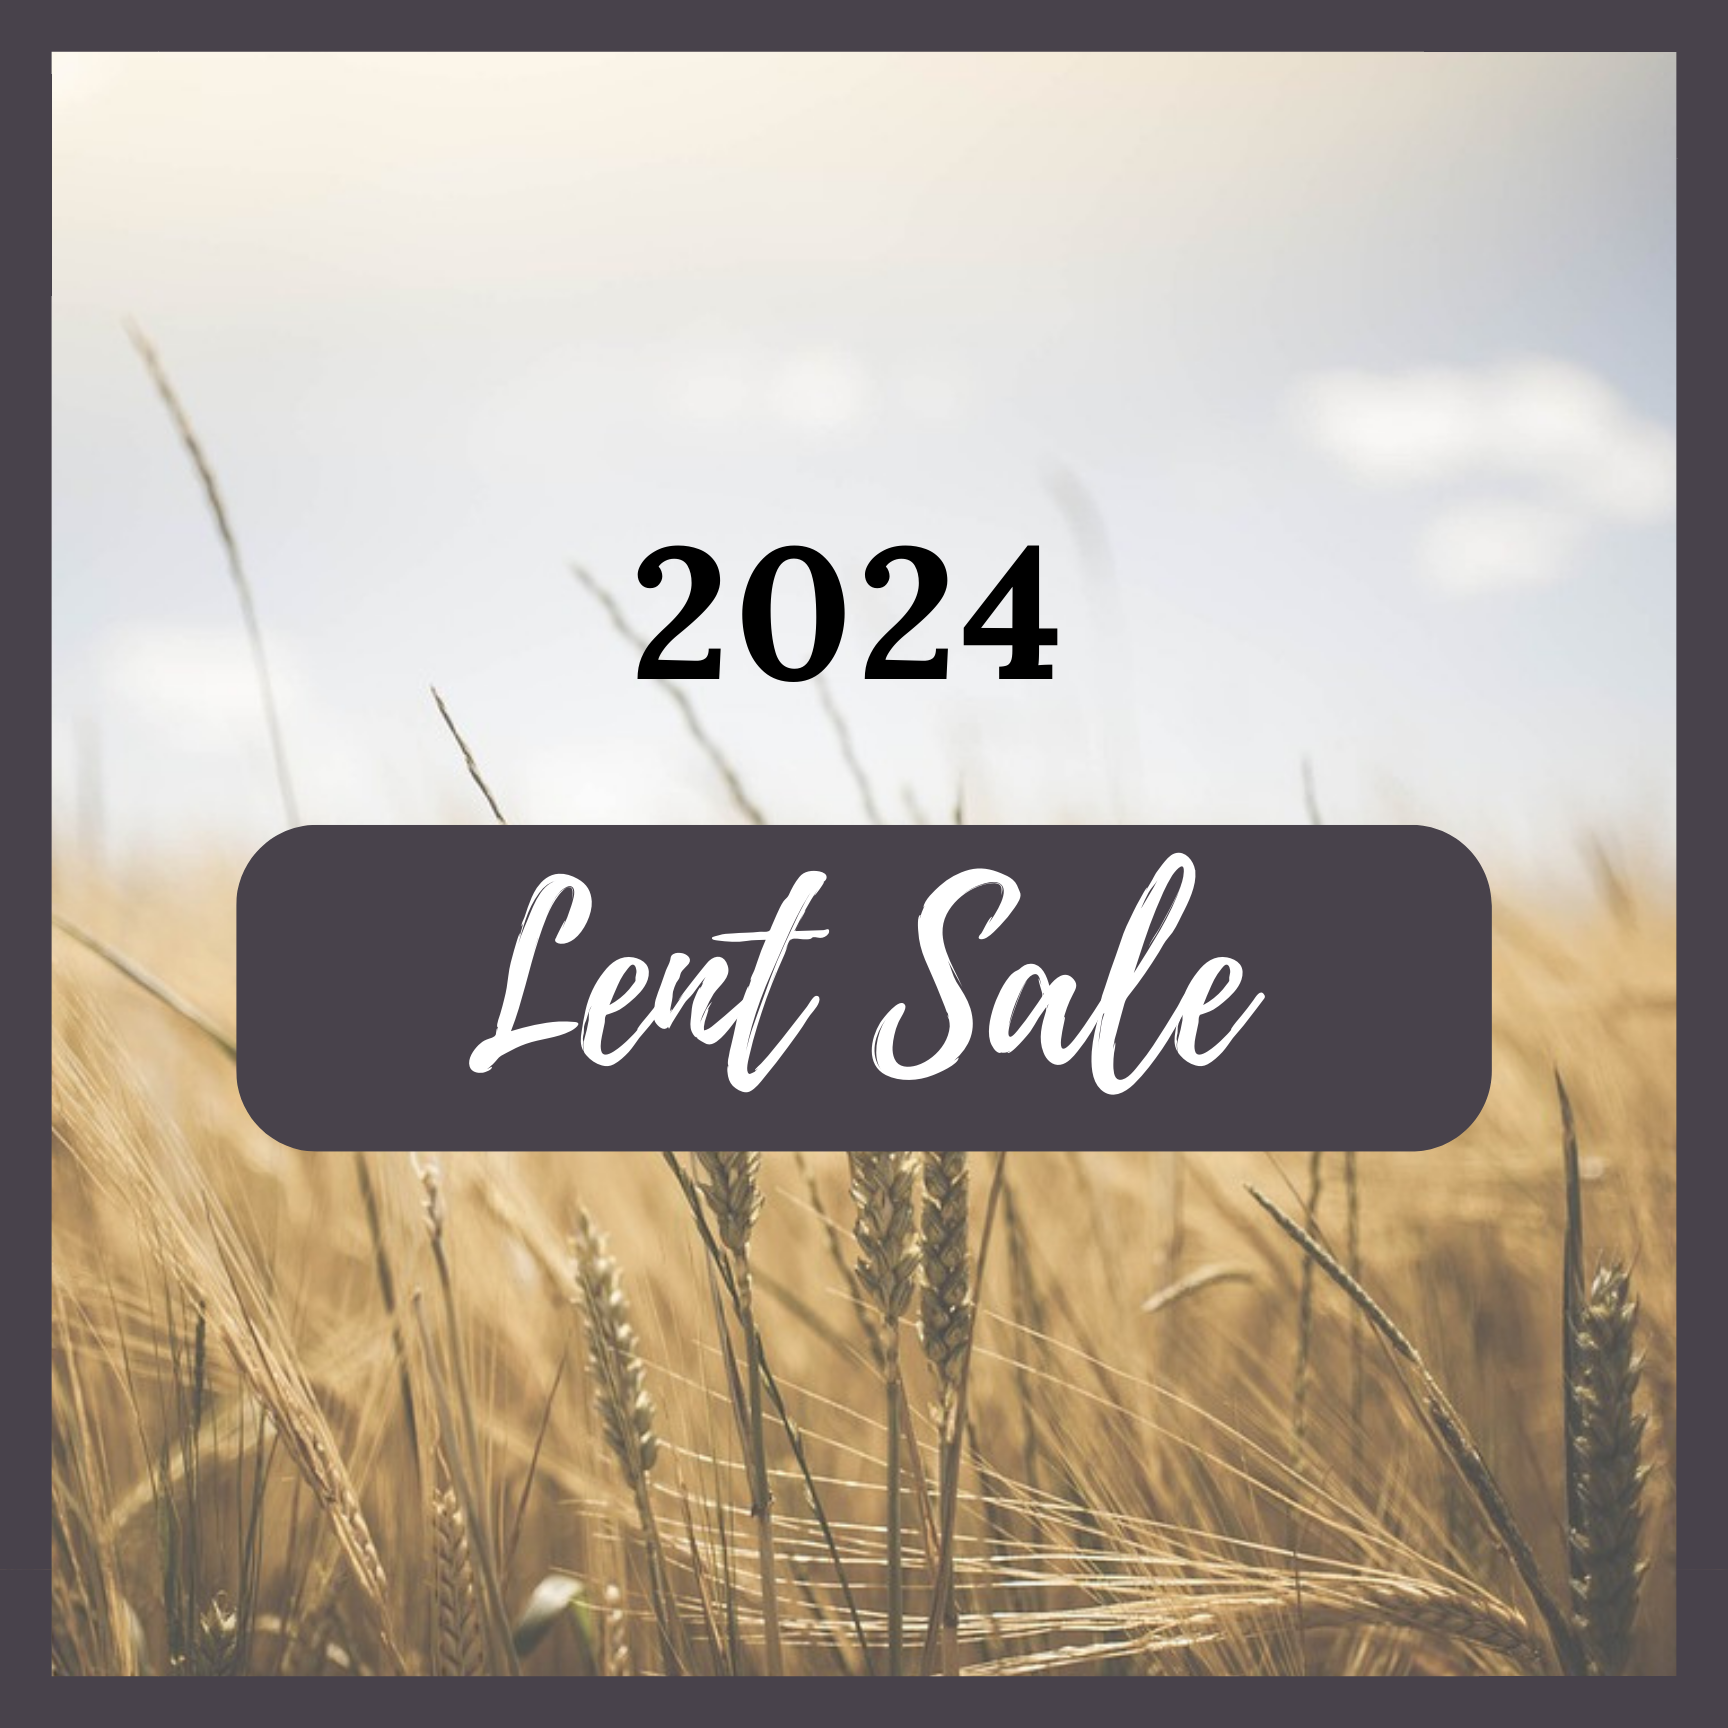 Lent Sale 2024 Coming Soon!